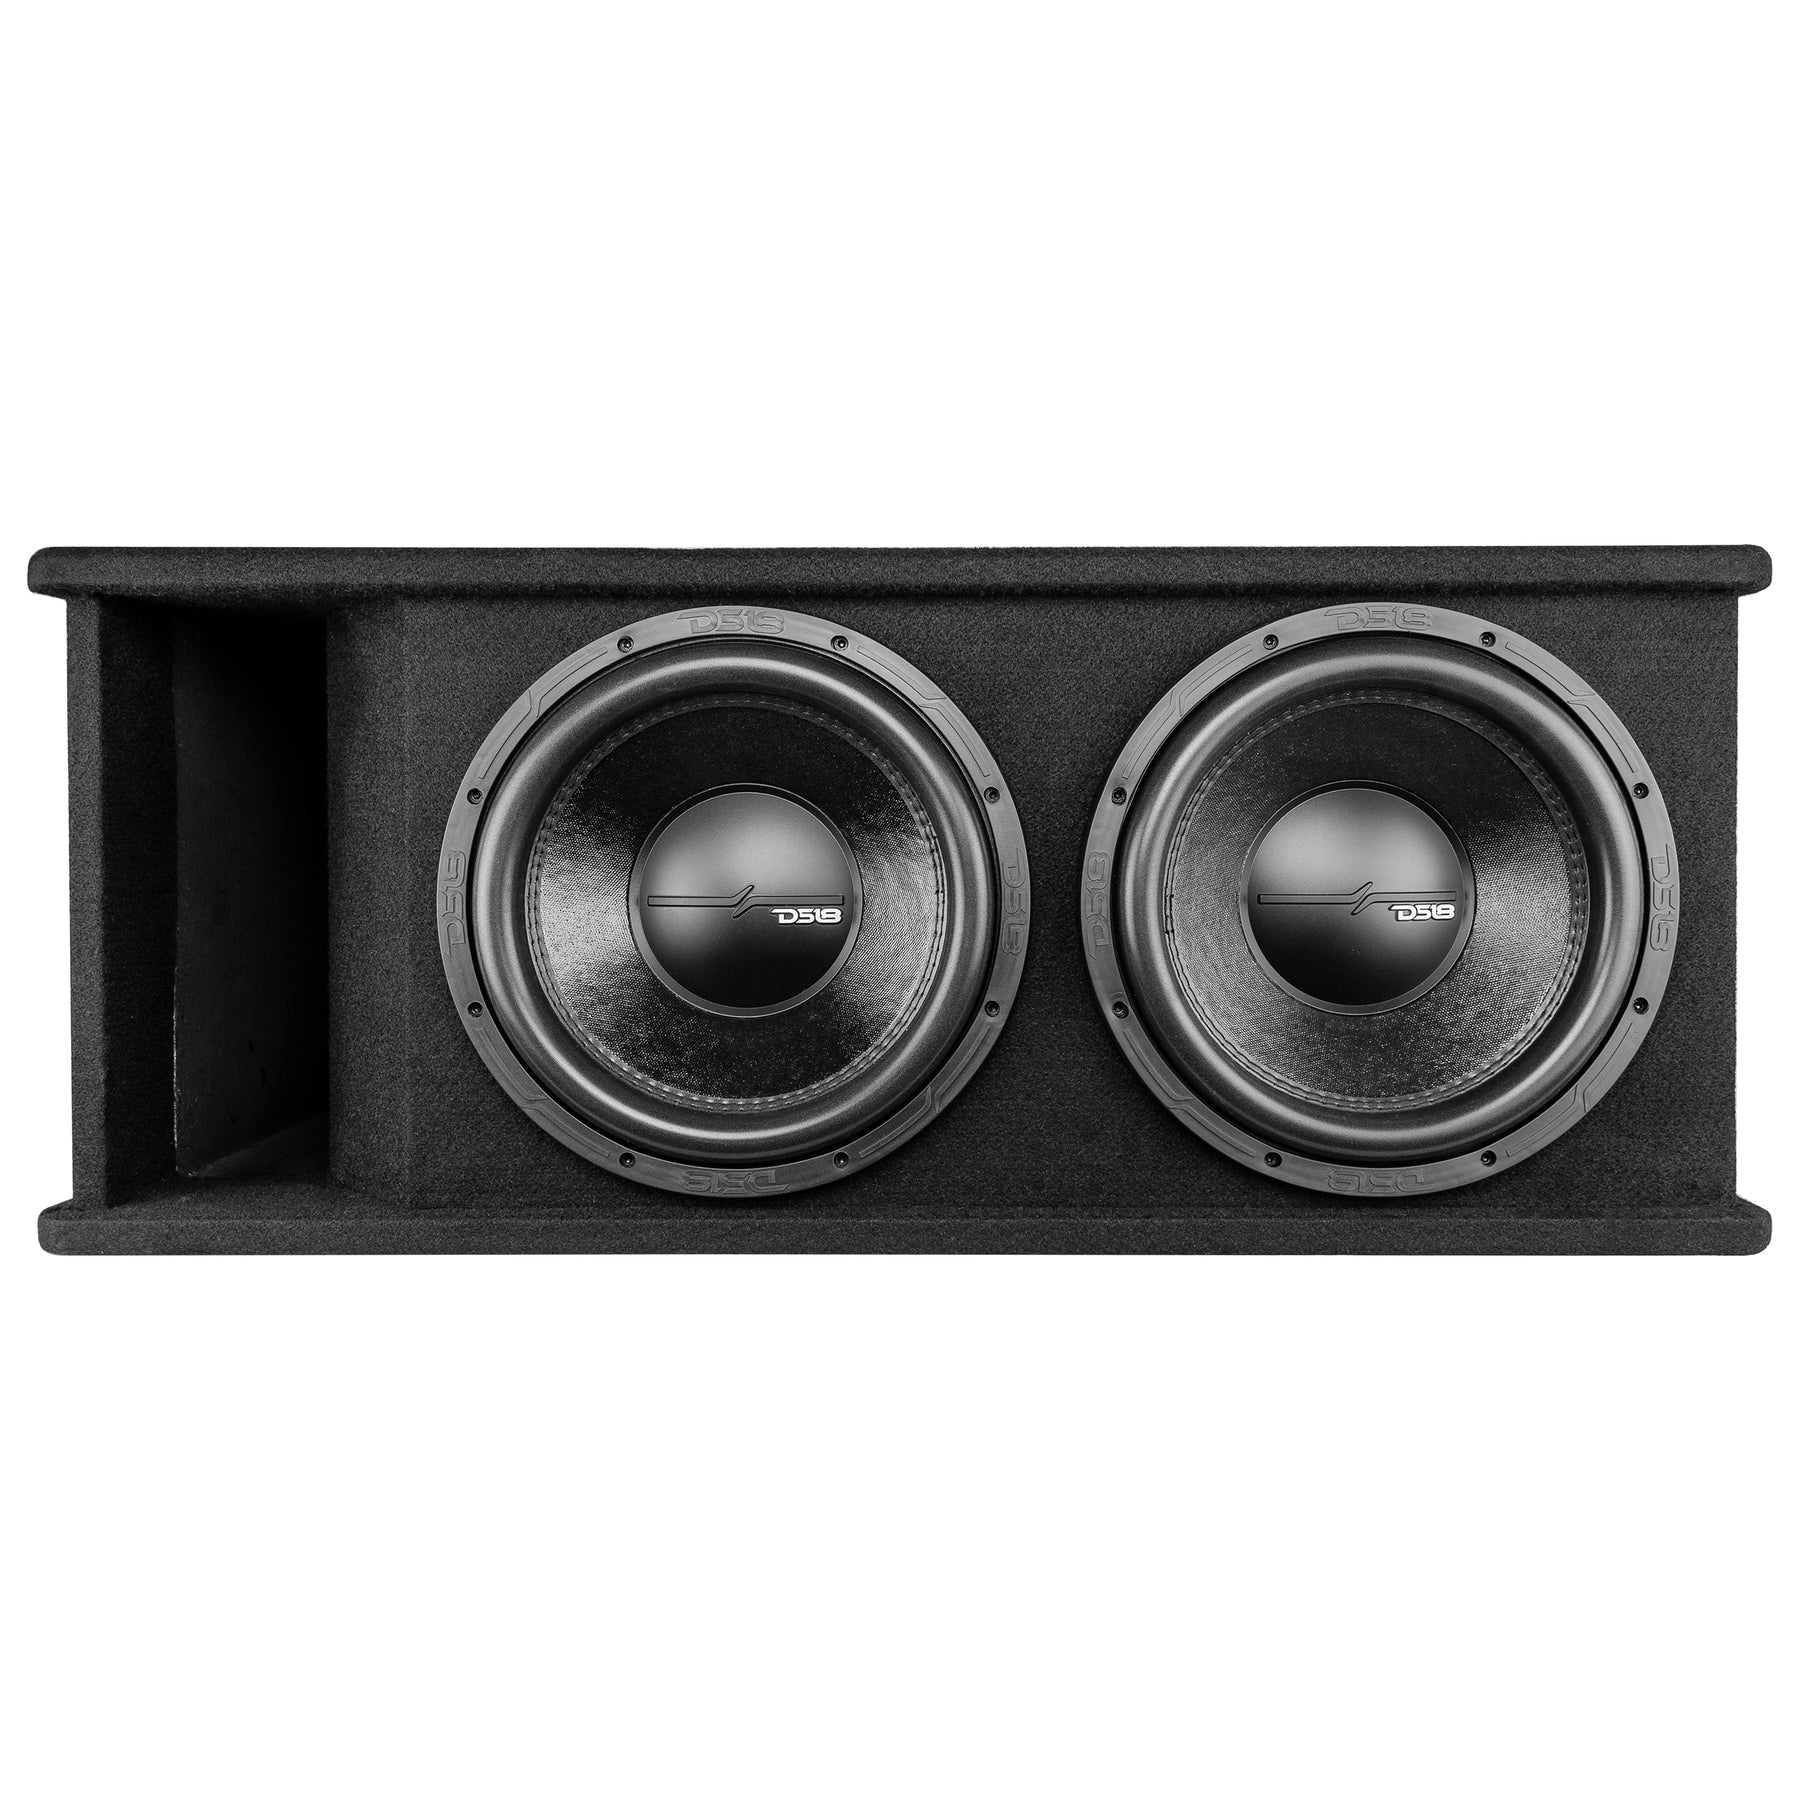 DS18 ZR212LD-PKG Bass Package 2 x ZR12D4 12" Subwoofers In a Ported Box 3200 Watts with ZR2000.1D Class D 1-Channel Amplifier, and Ampkit0